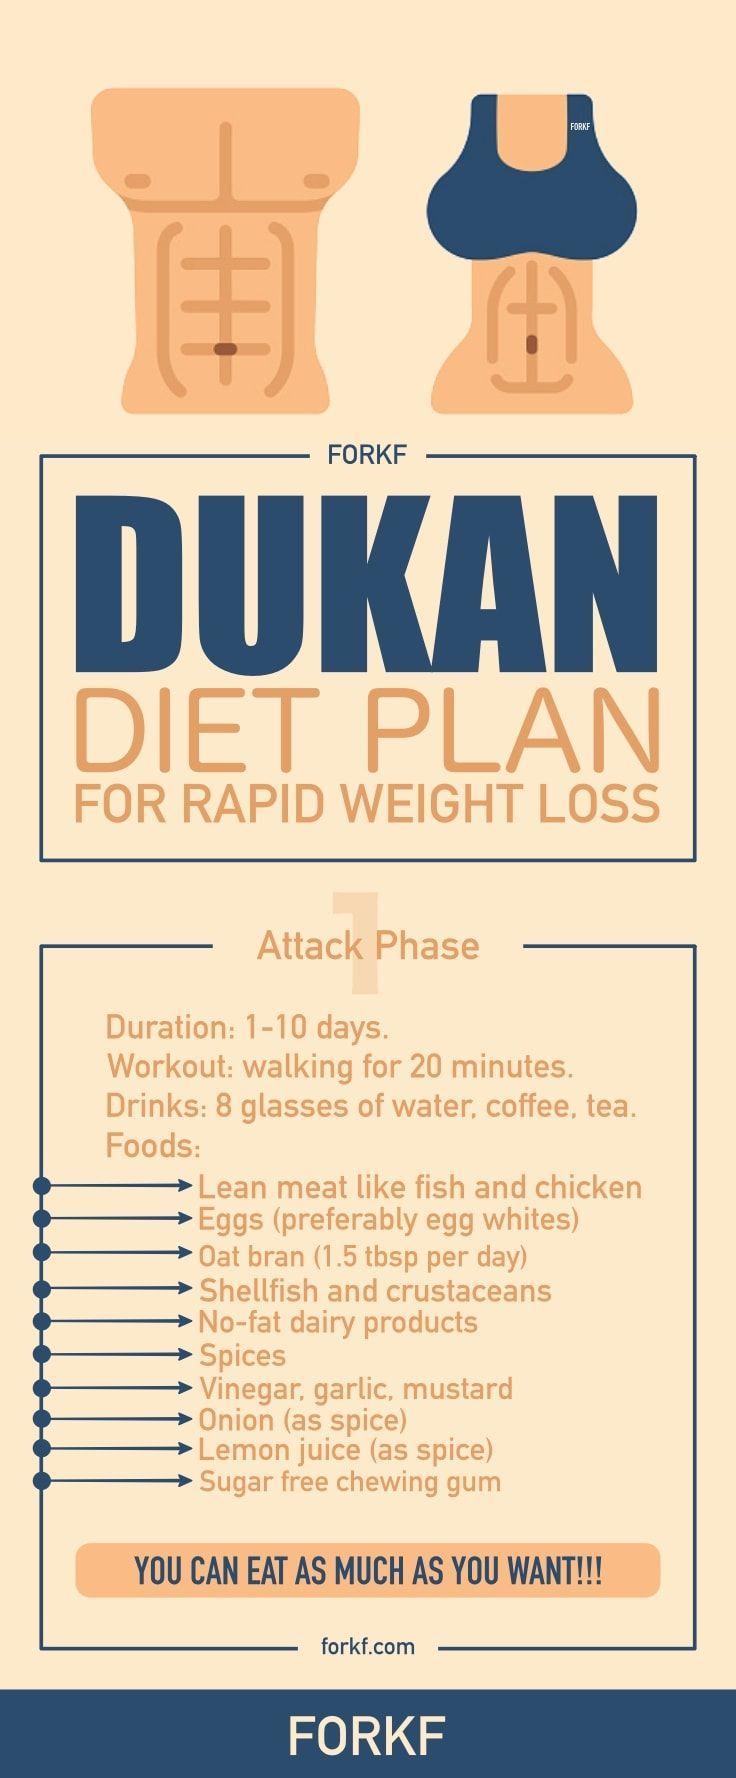 Dukan diet has gained so much of popularity because it is simple, easy to follow and helps lose weight really fast